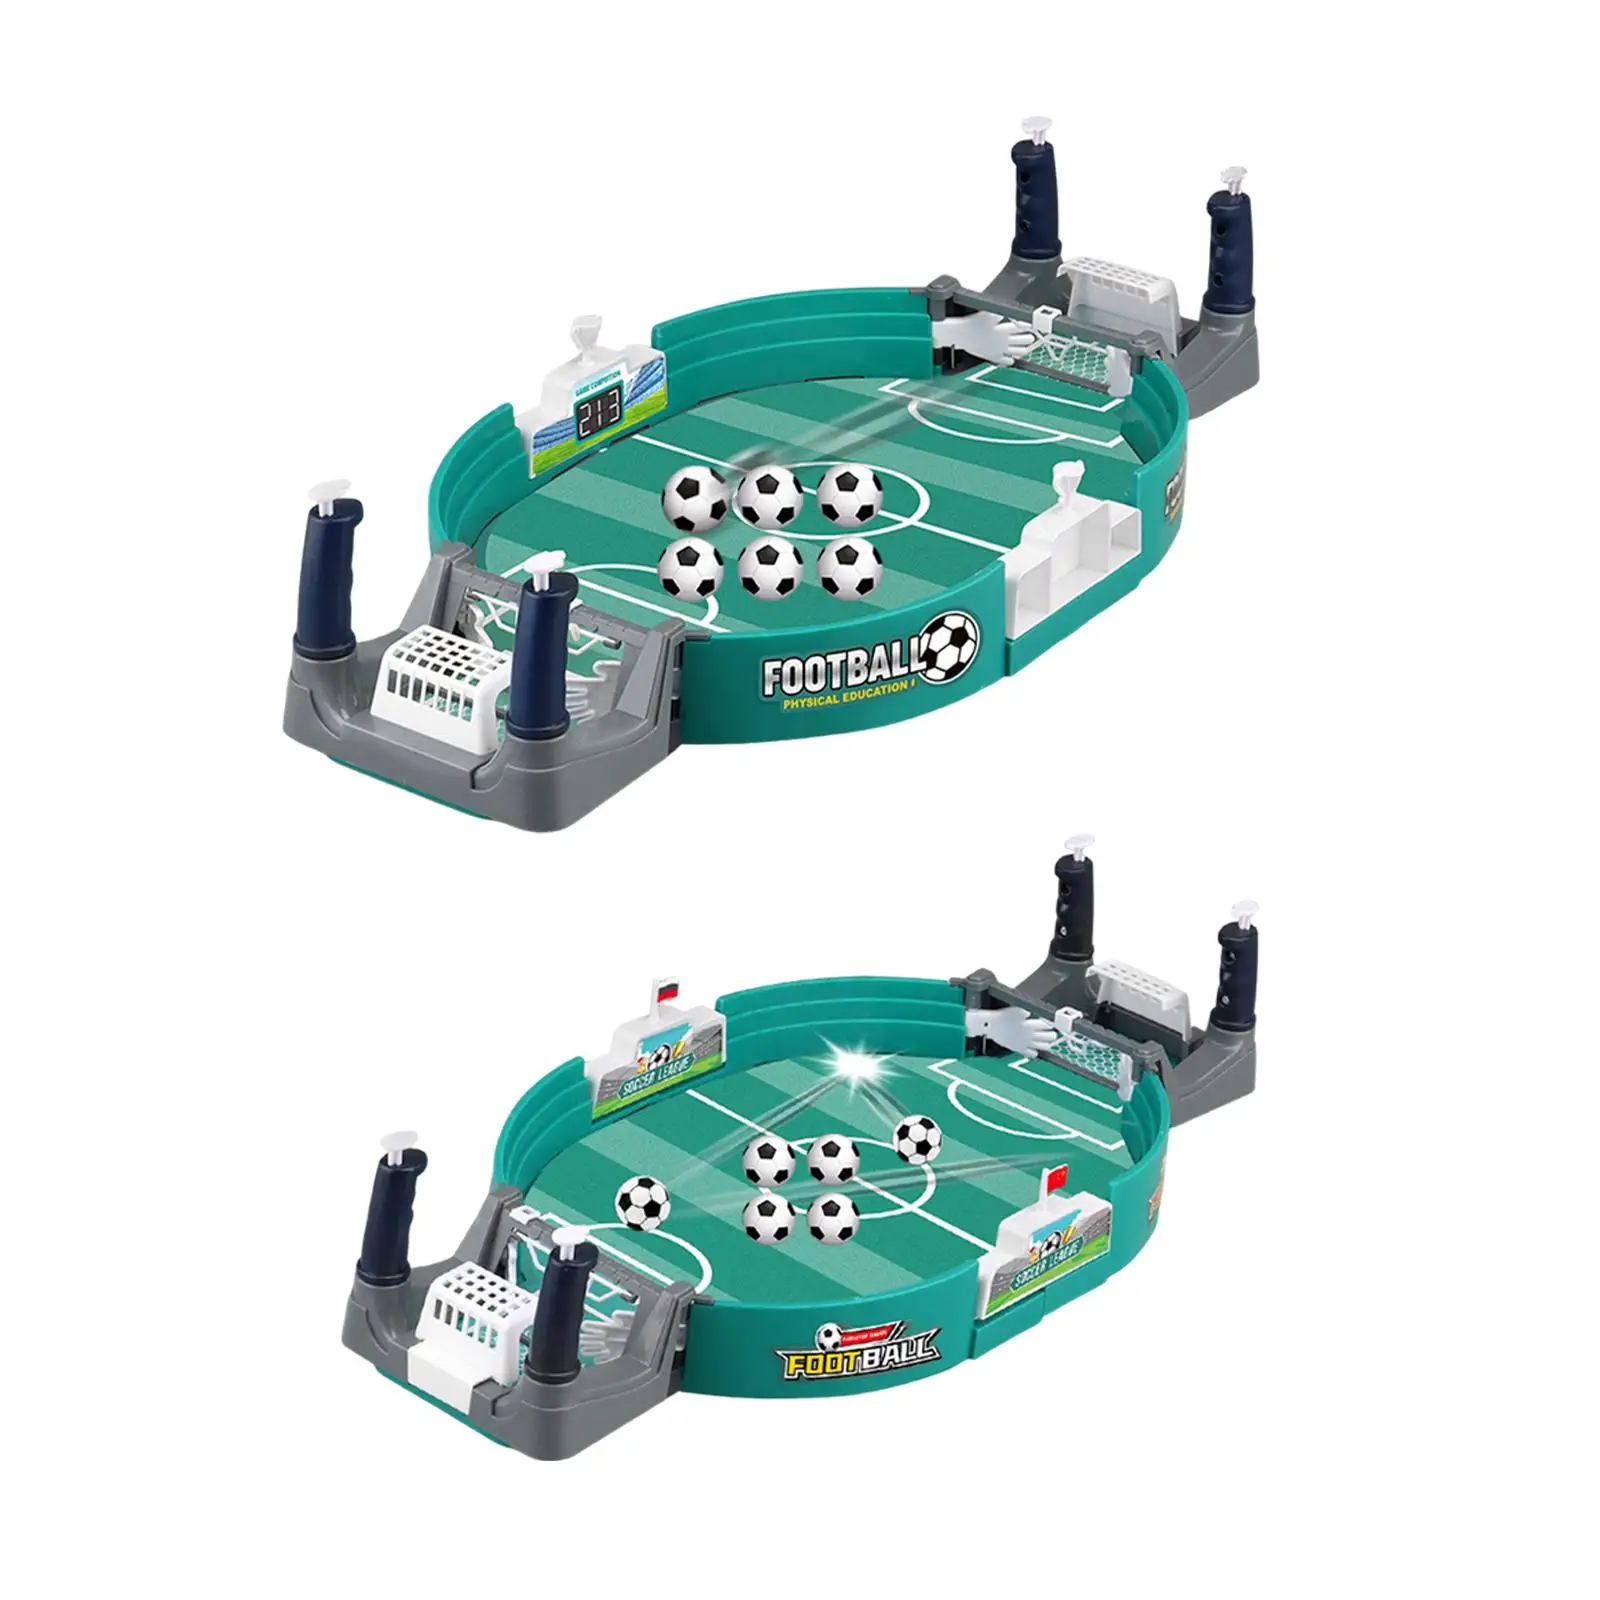 Foosball Pinball Games Indoor Sports Board with Finger Fighting Interactive Toys Soccer Football Games for Kids